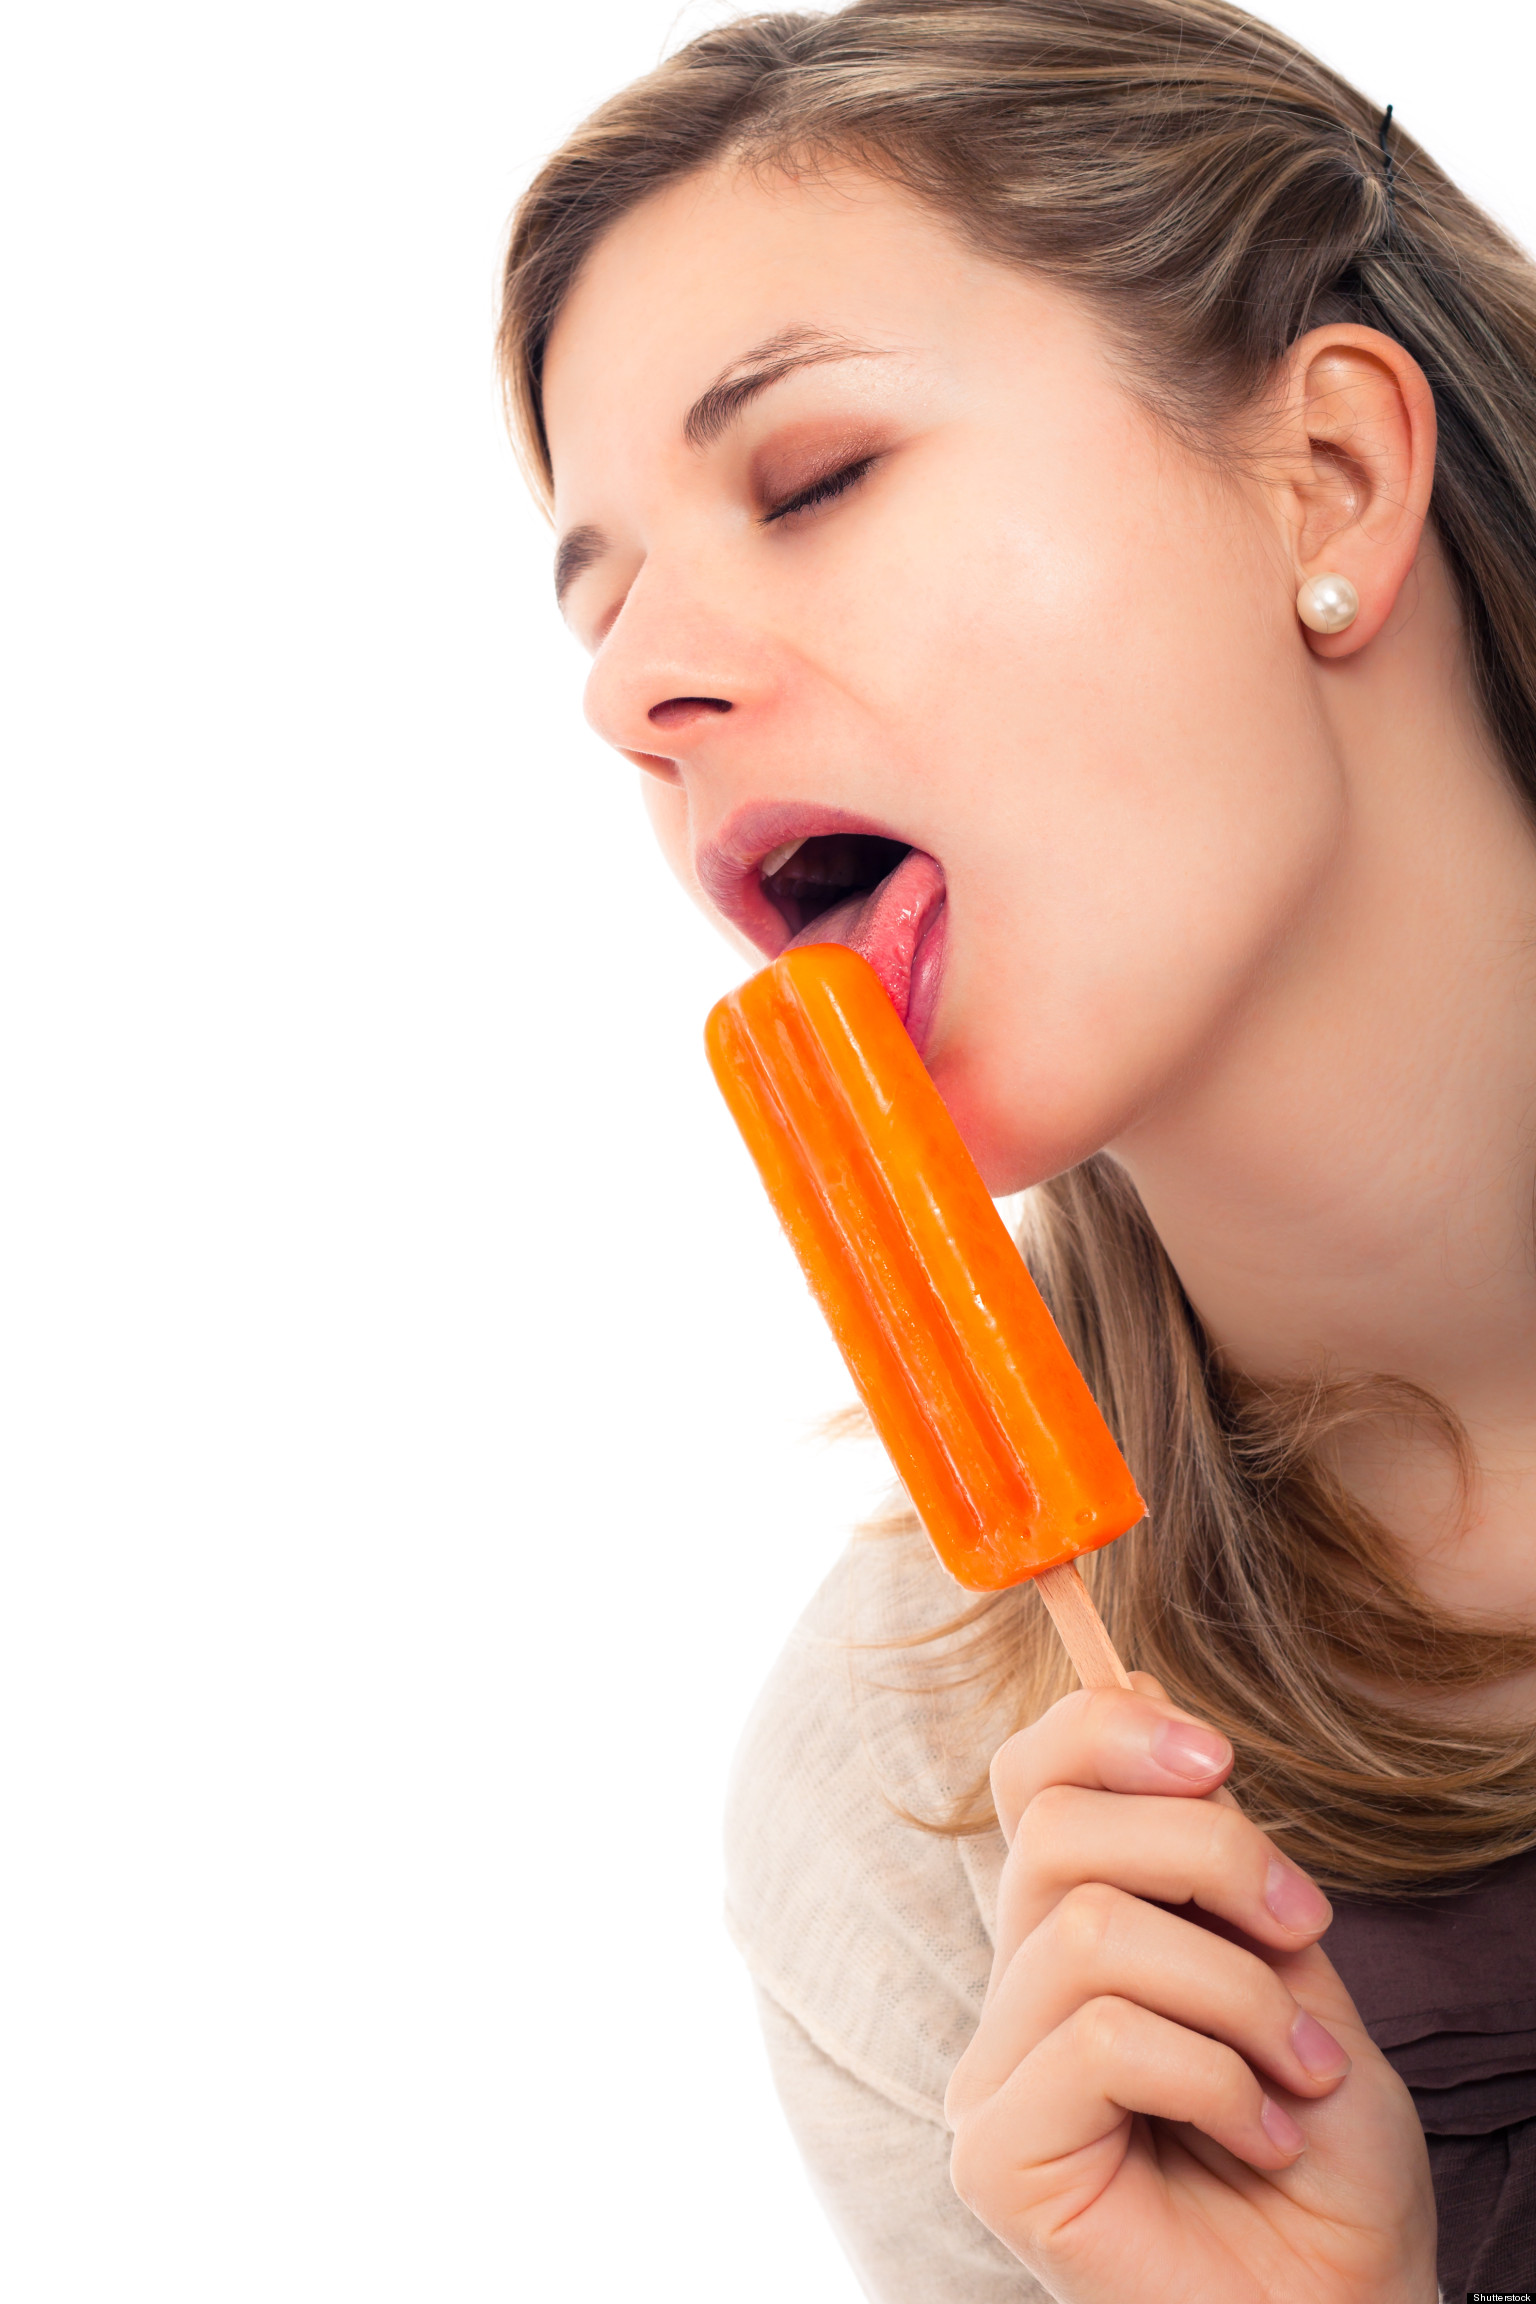 People In Stock Photos Don T Know How To Eat Popsicles Photos Huffpost